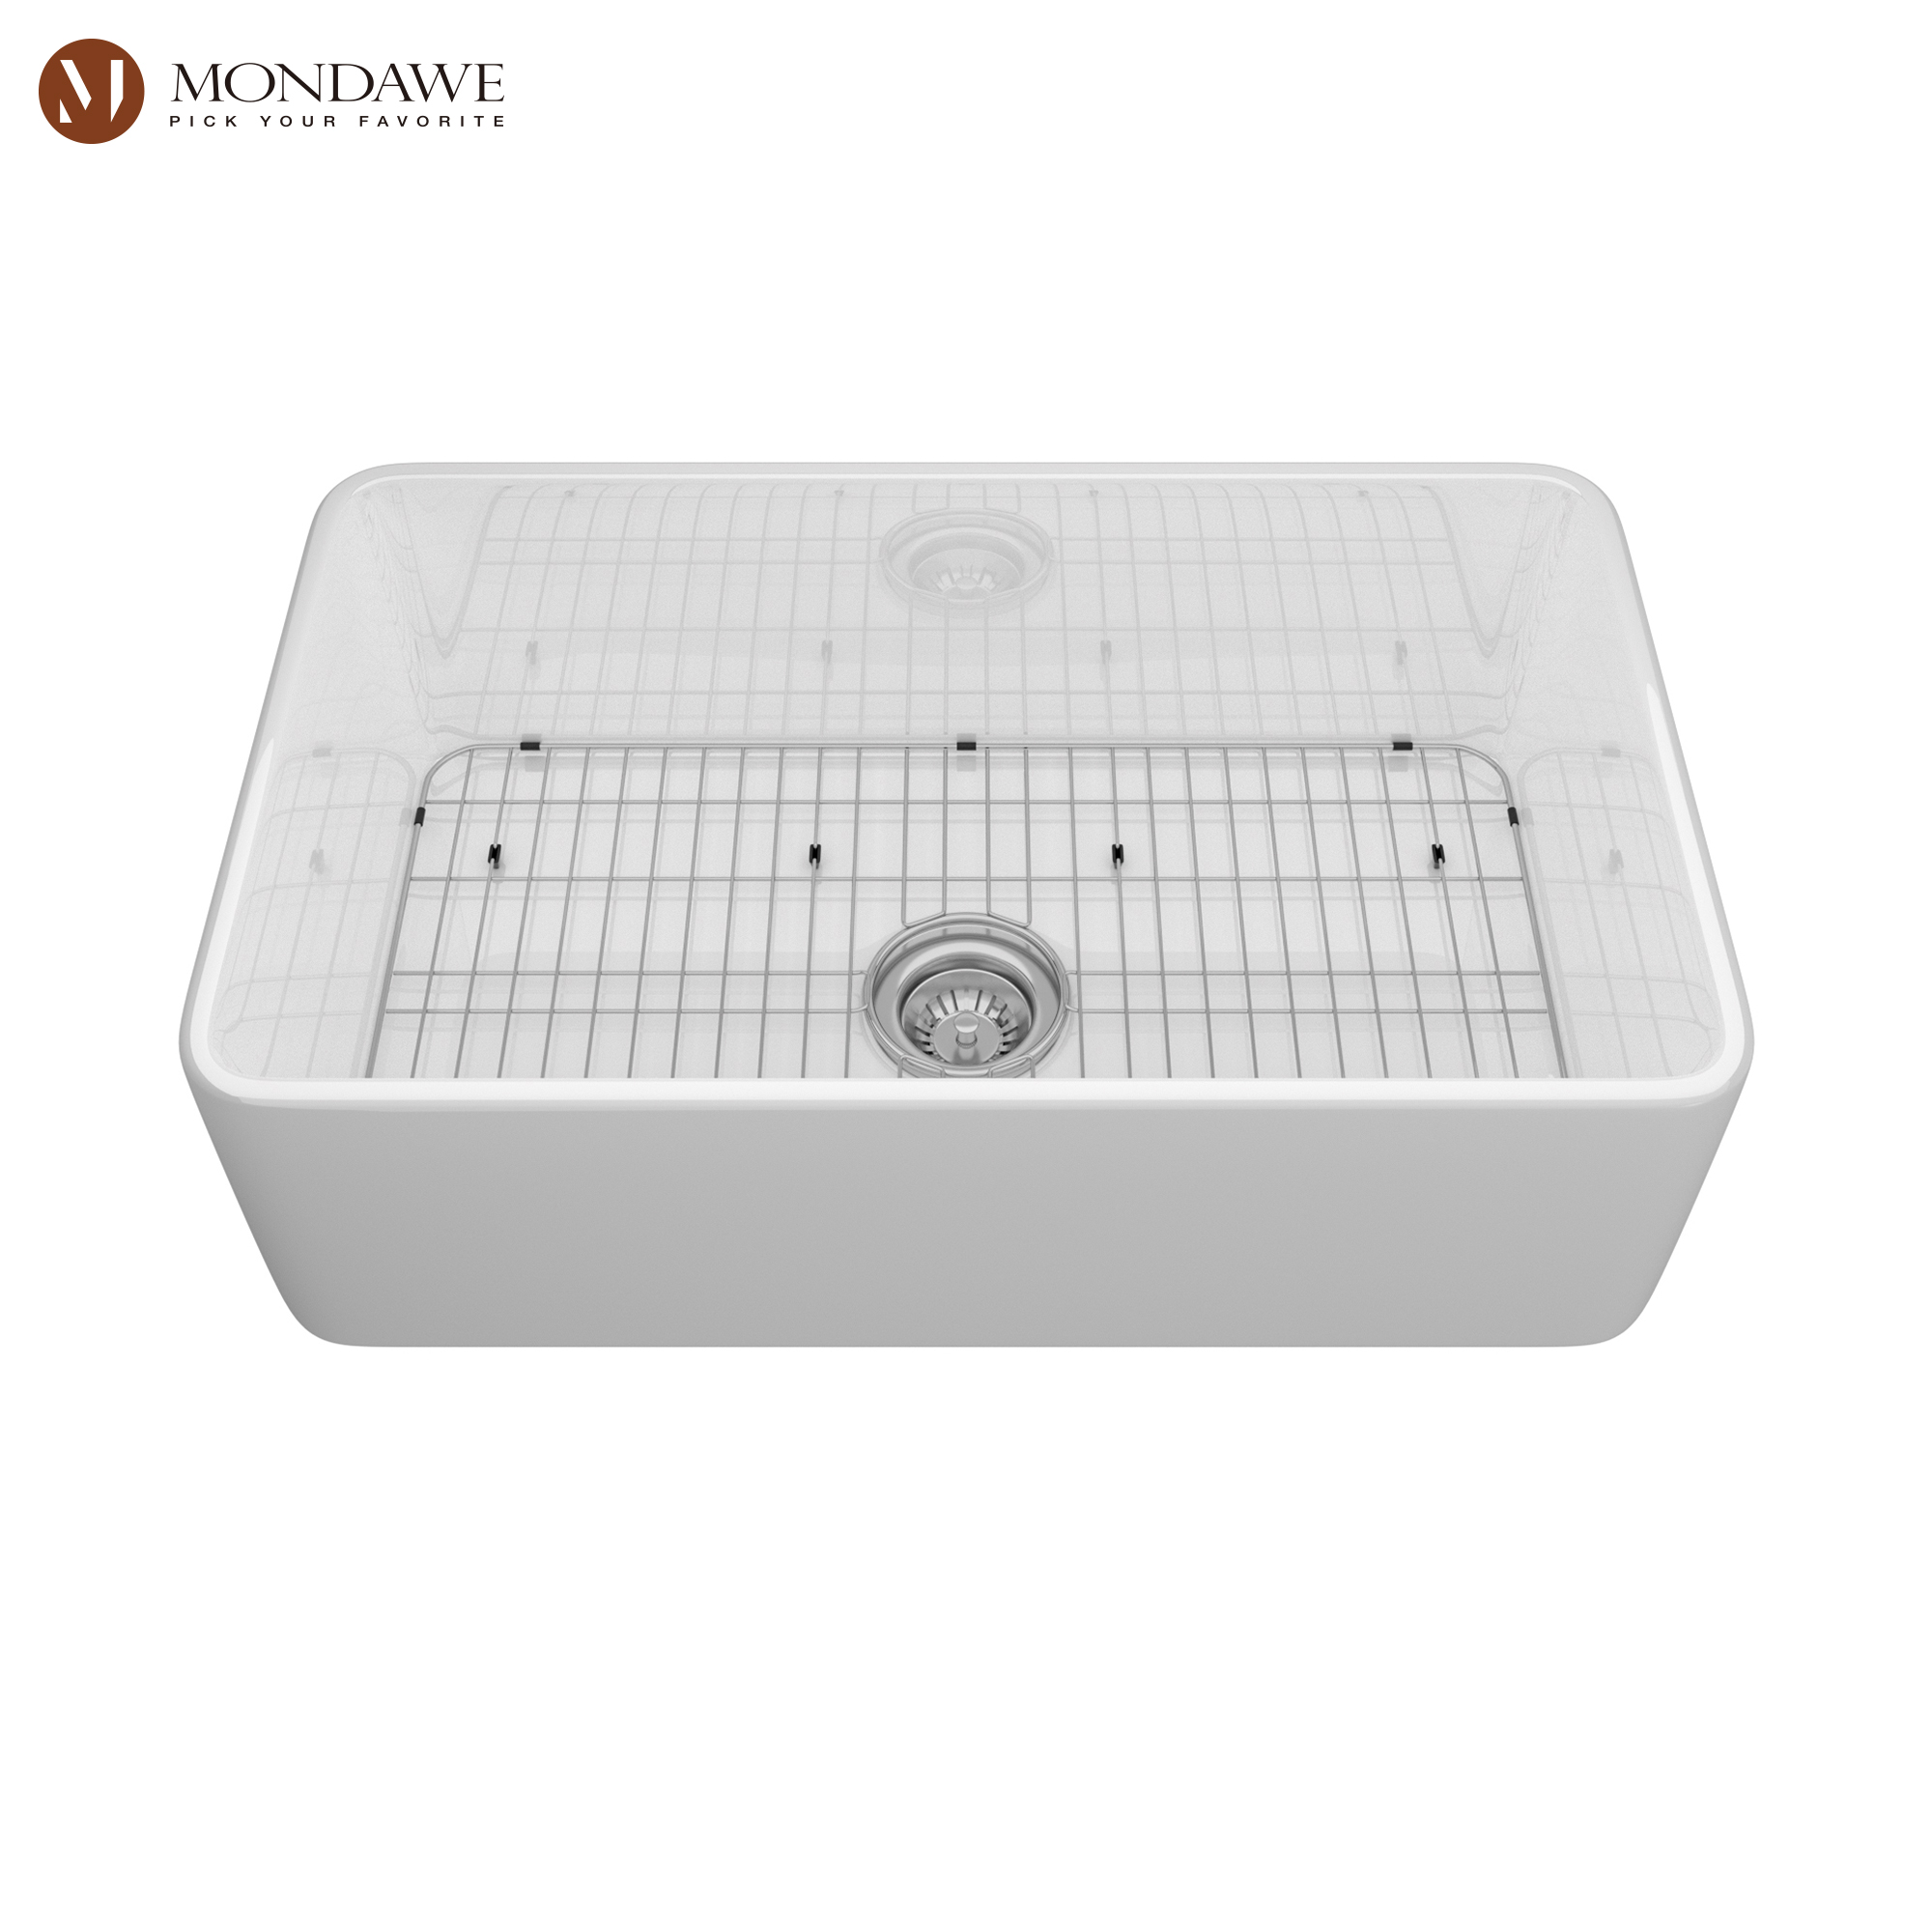 Farmhouse 30 in. single bowl fireclay kitchen sink in white comes with stainless steel bottom grid and strainer-Mondawe